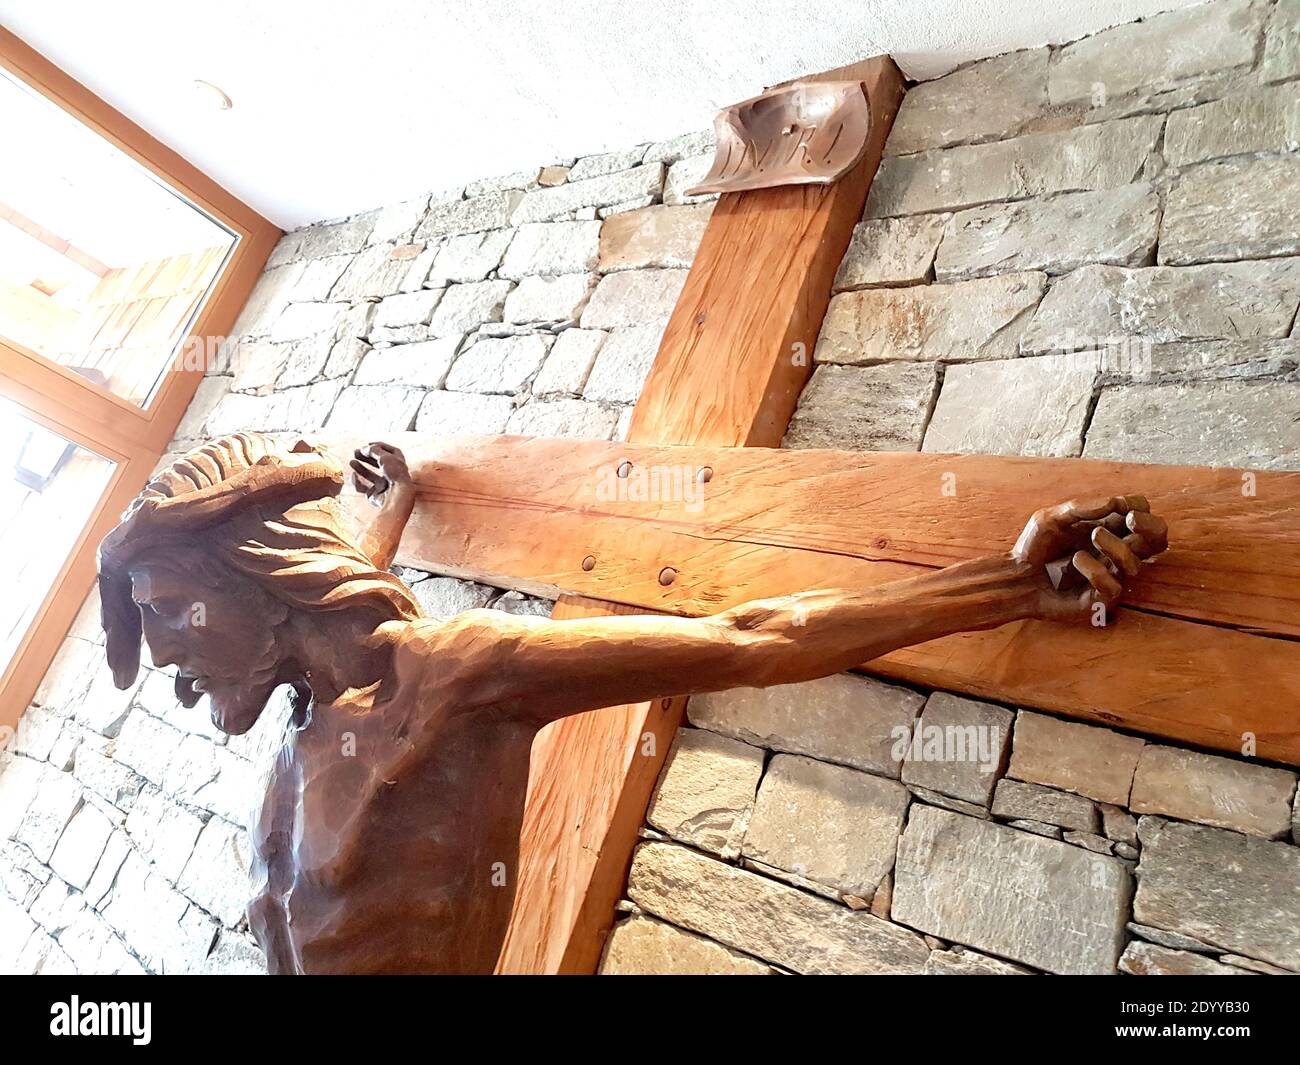 mountain wood that became a sculpture of jesus christ crucified for us, spontaneous religiosity of the people Stock Photo